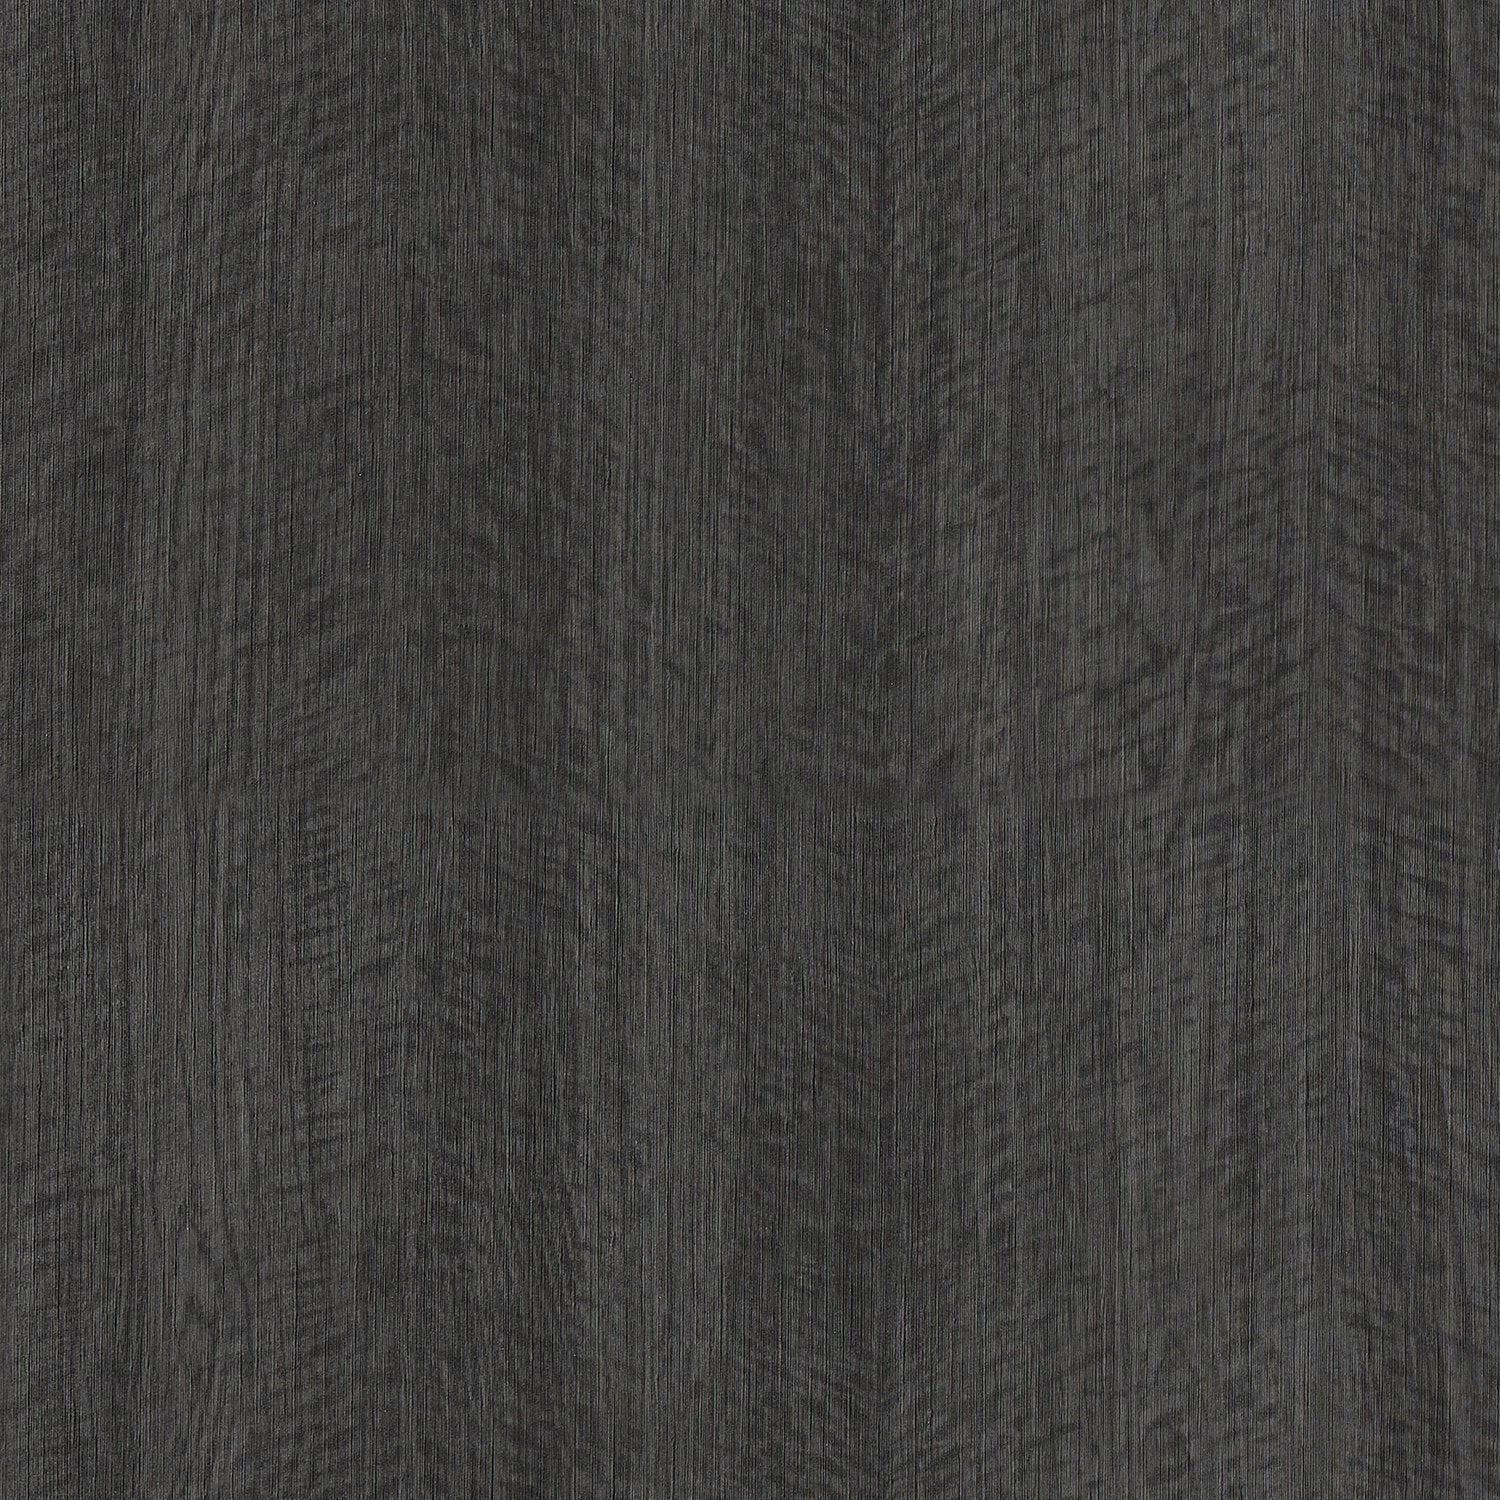 Woodn't It Be Nice - Y47877 - Wallcovering - Vycon - Kube Contract